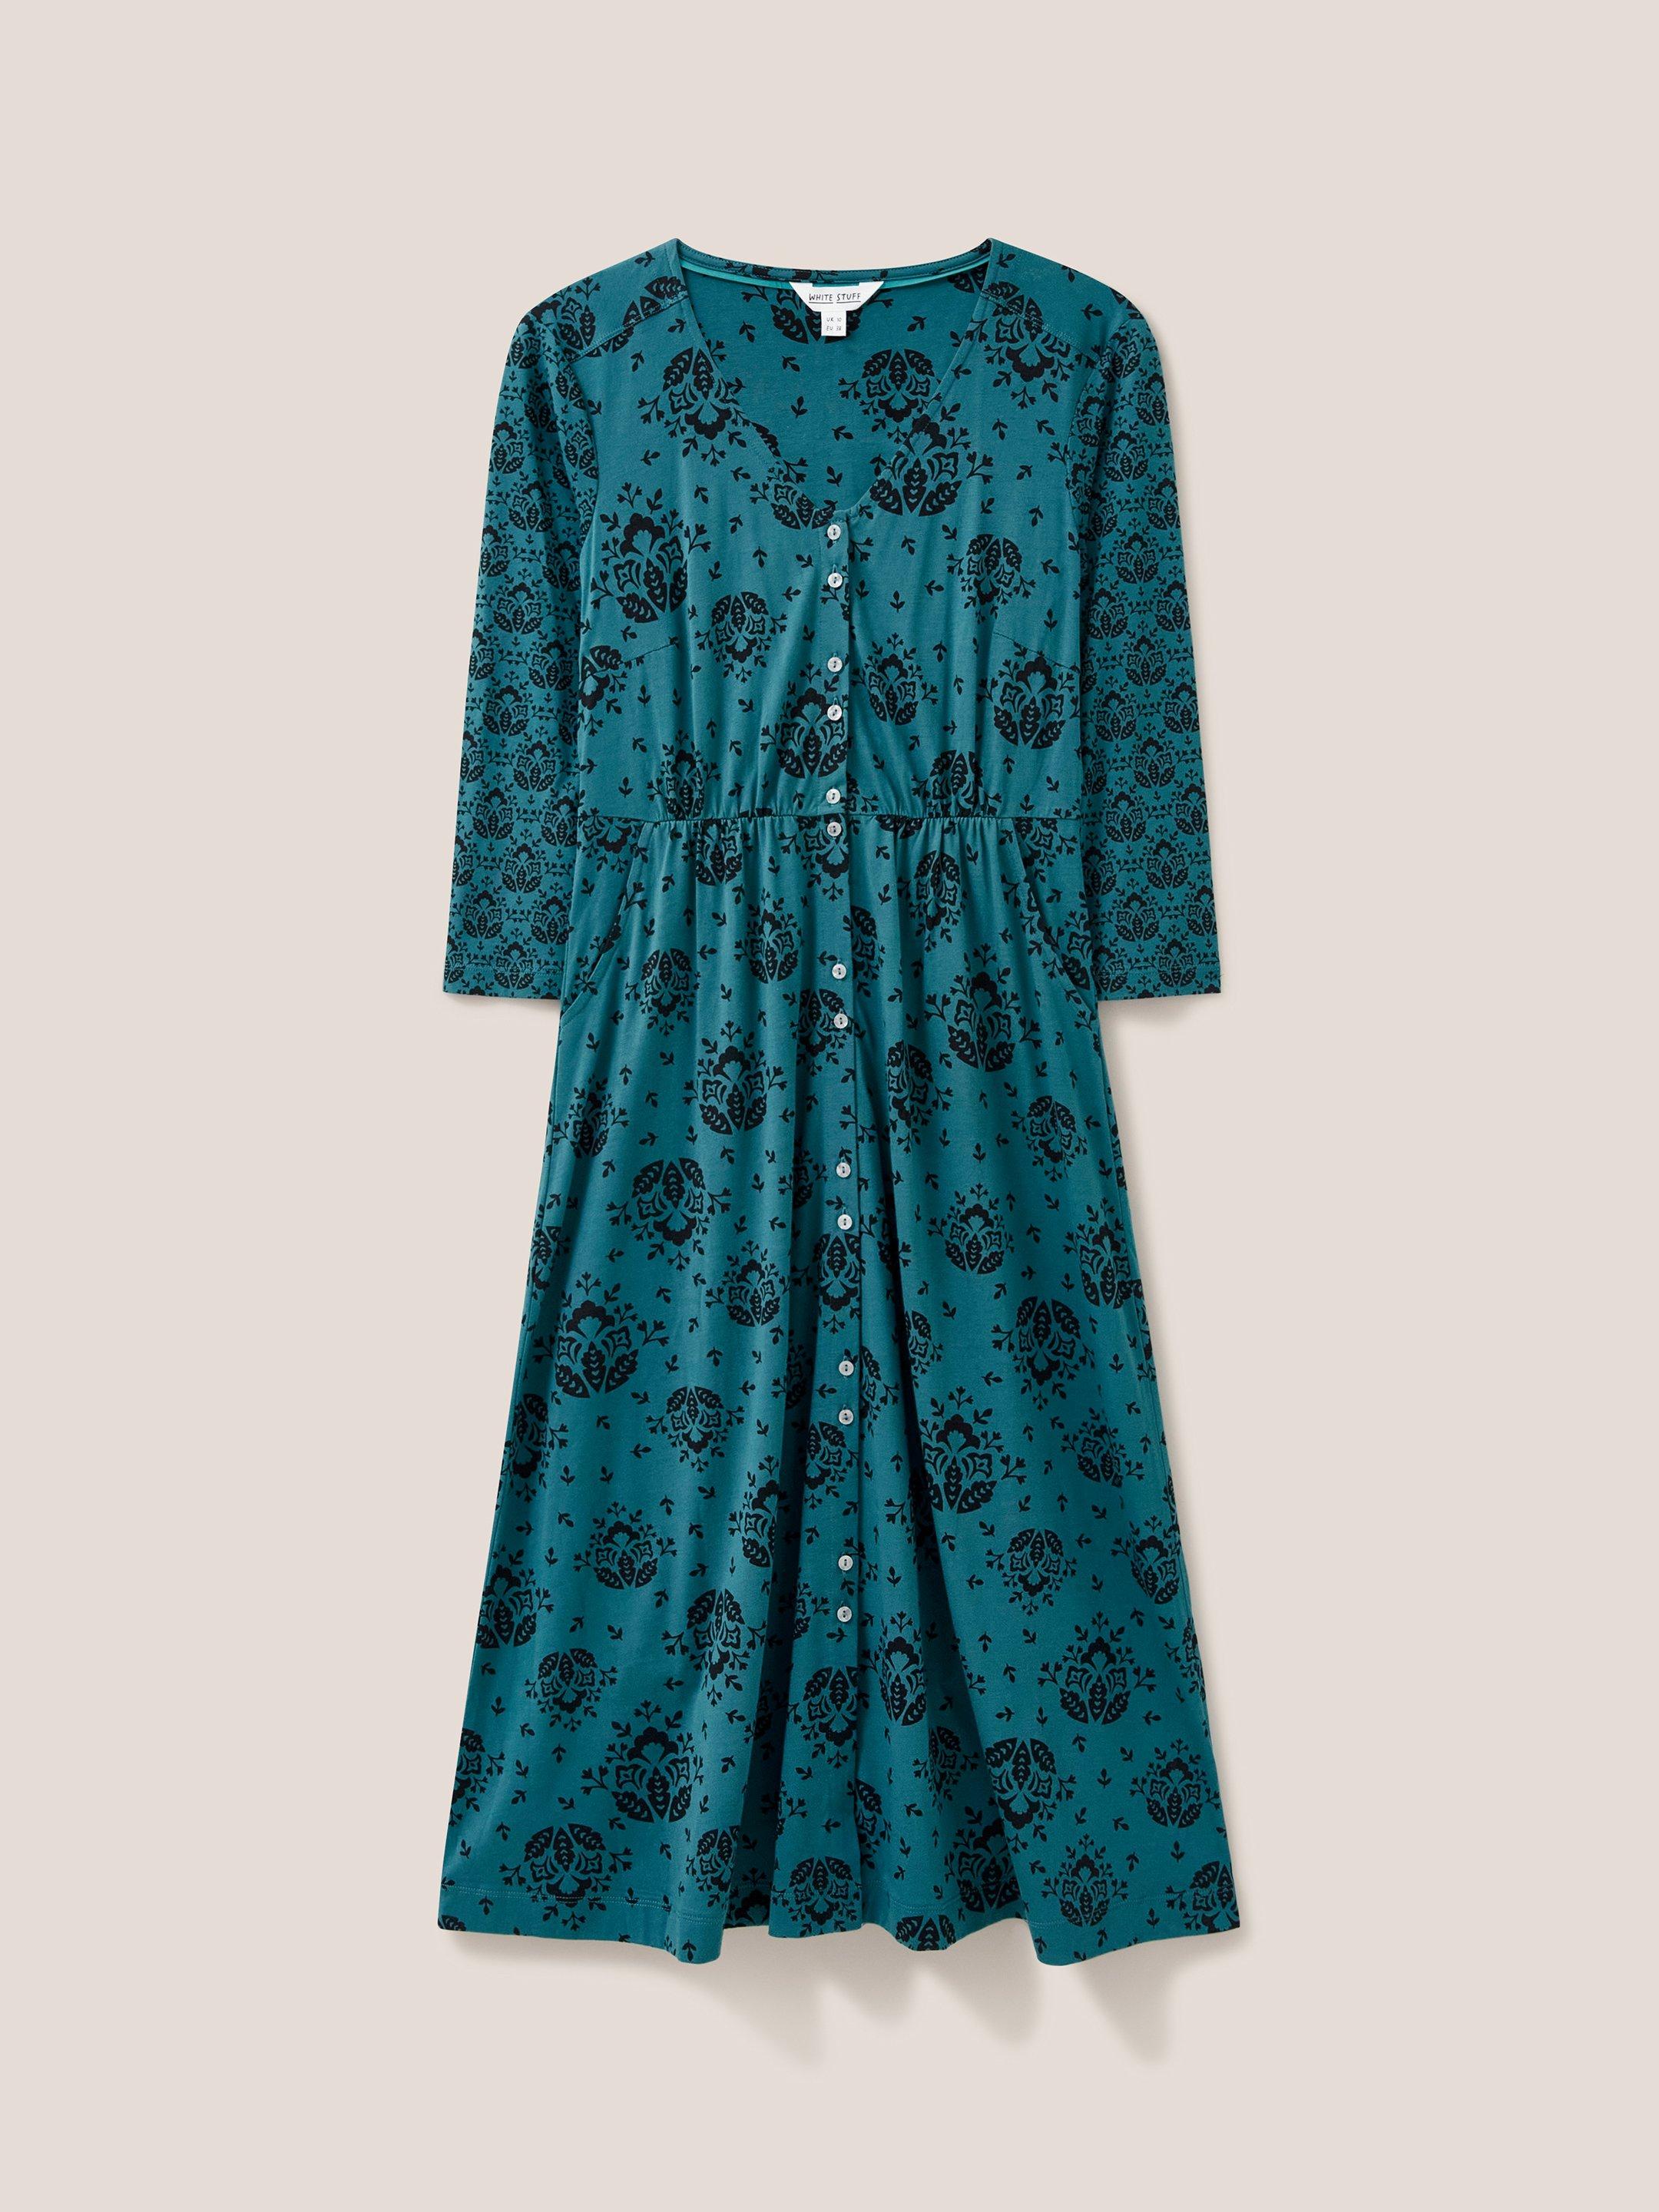 Mia Jersey Cotton Dress in TEAL PR - FLAT FRONT